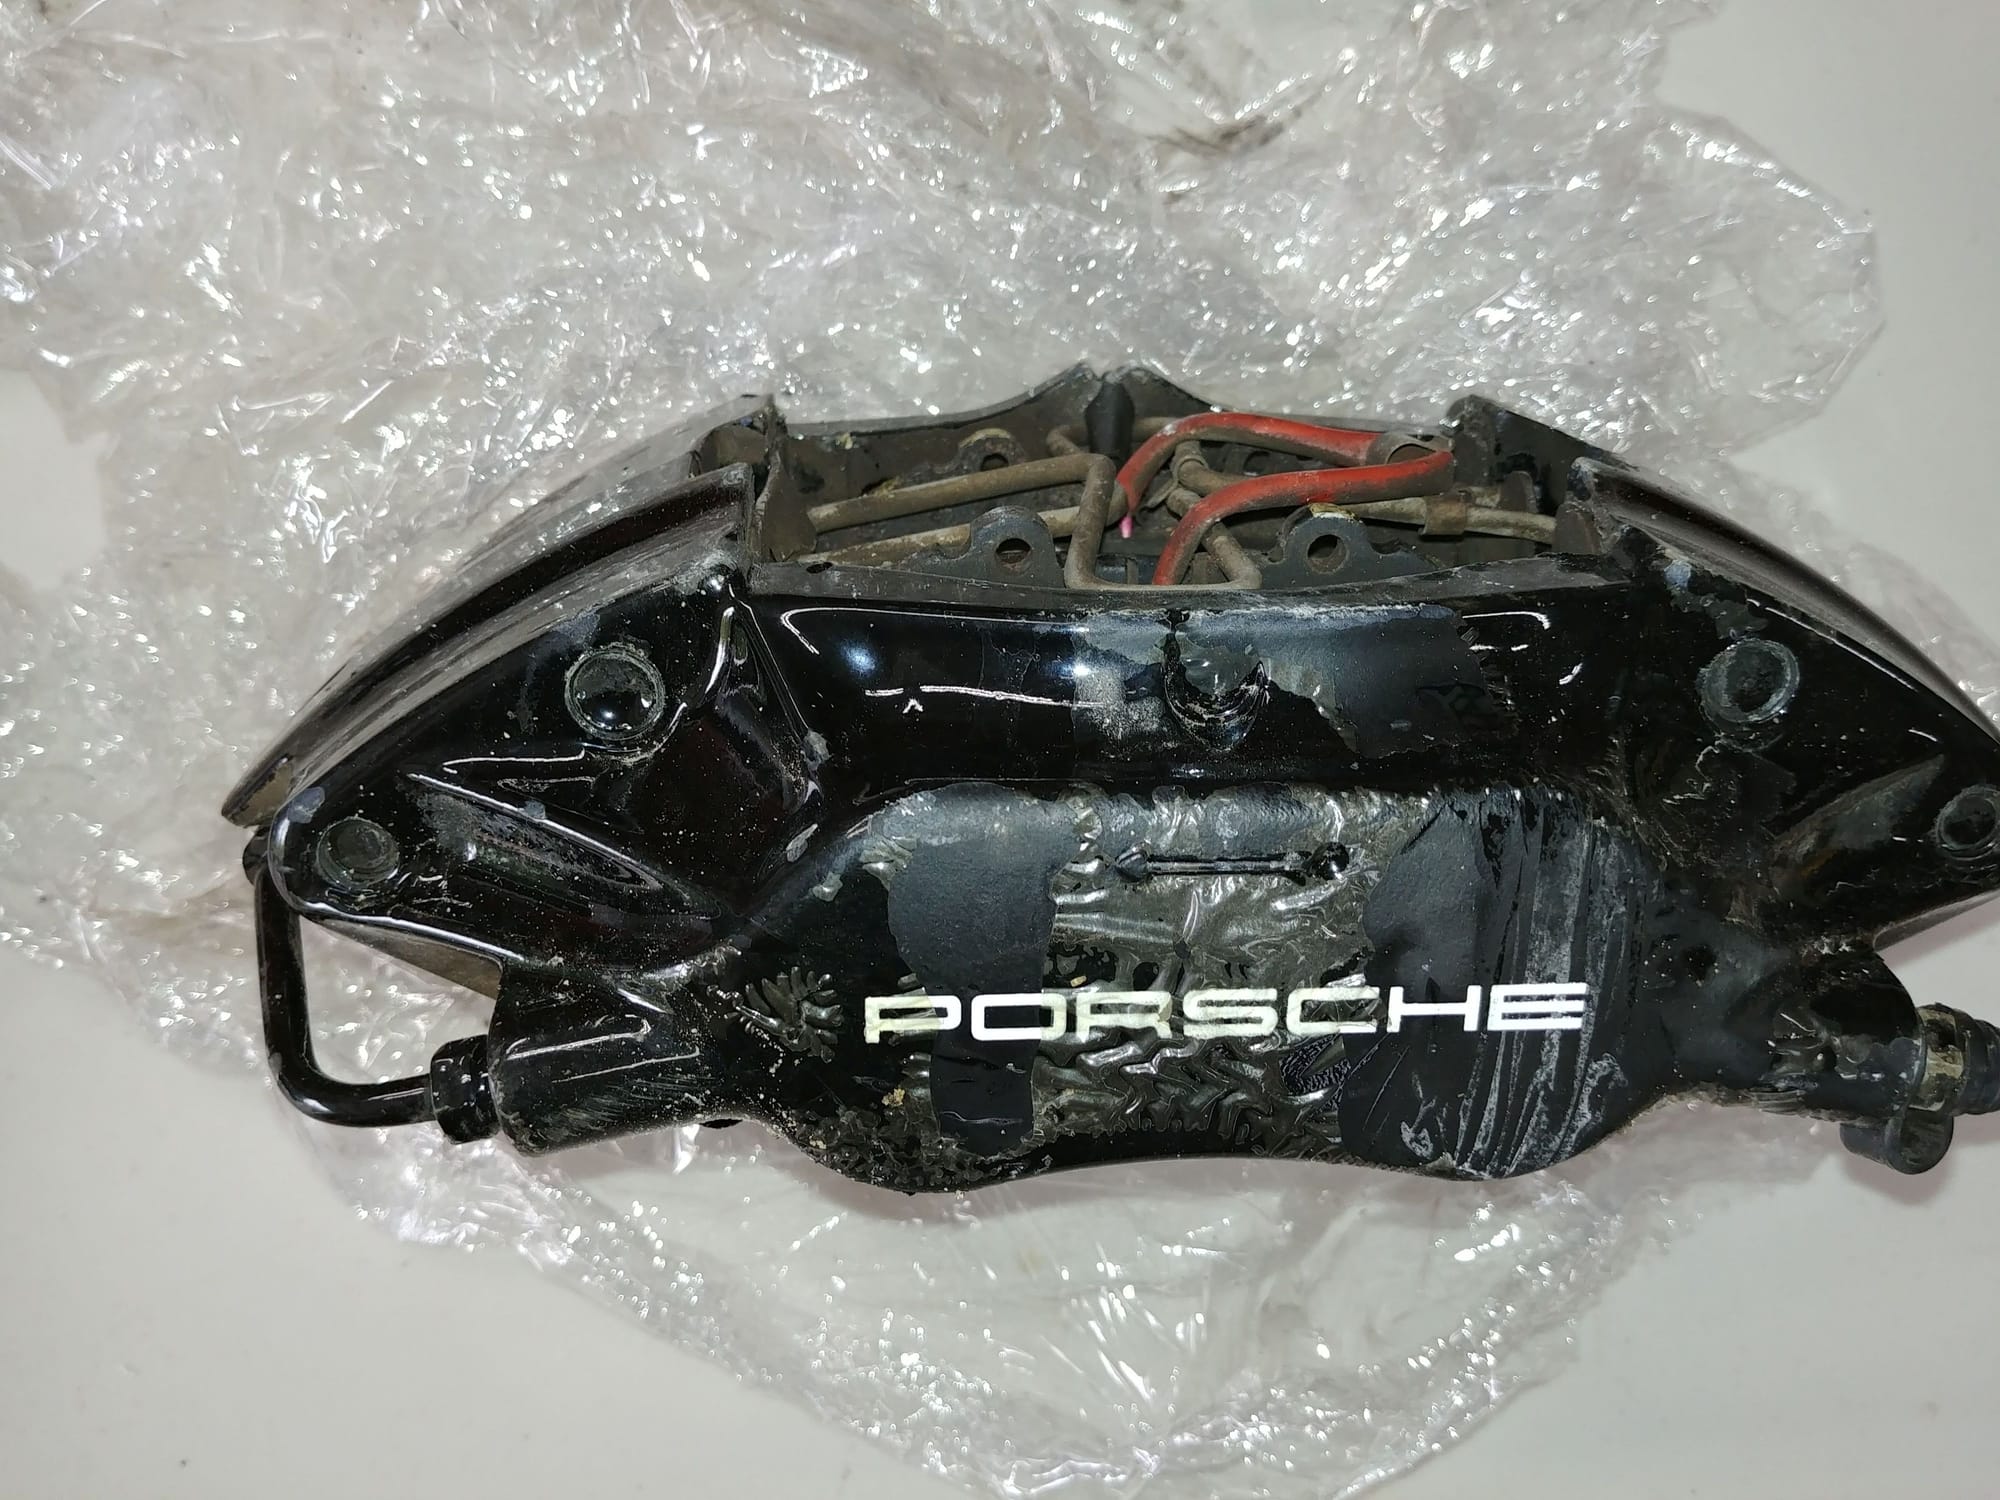 Brakes - Porsche 911 993 C2/C4 (1994-1998) OEM Brembo Front & Rear Brake Calipers Set - Used - Livermore, CA 94506, United States